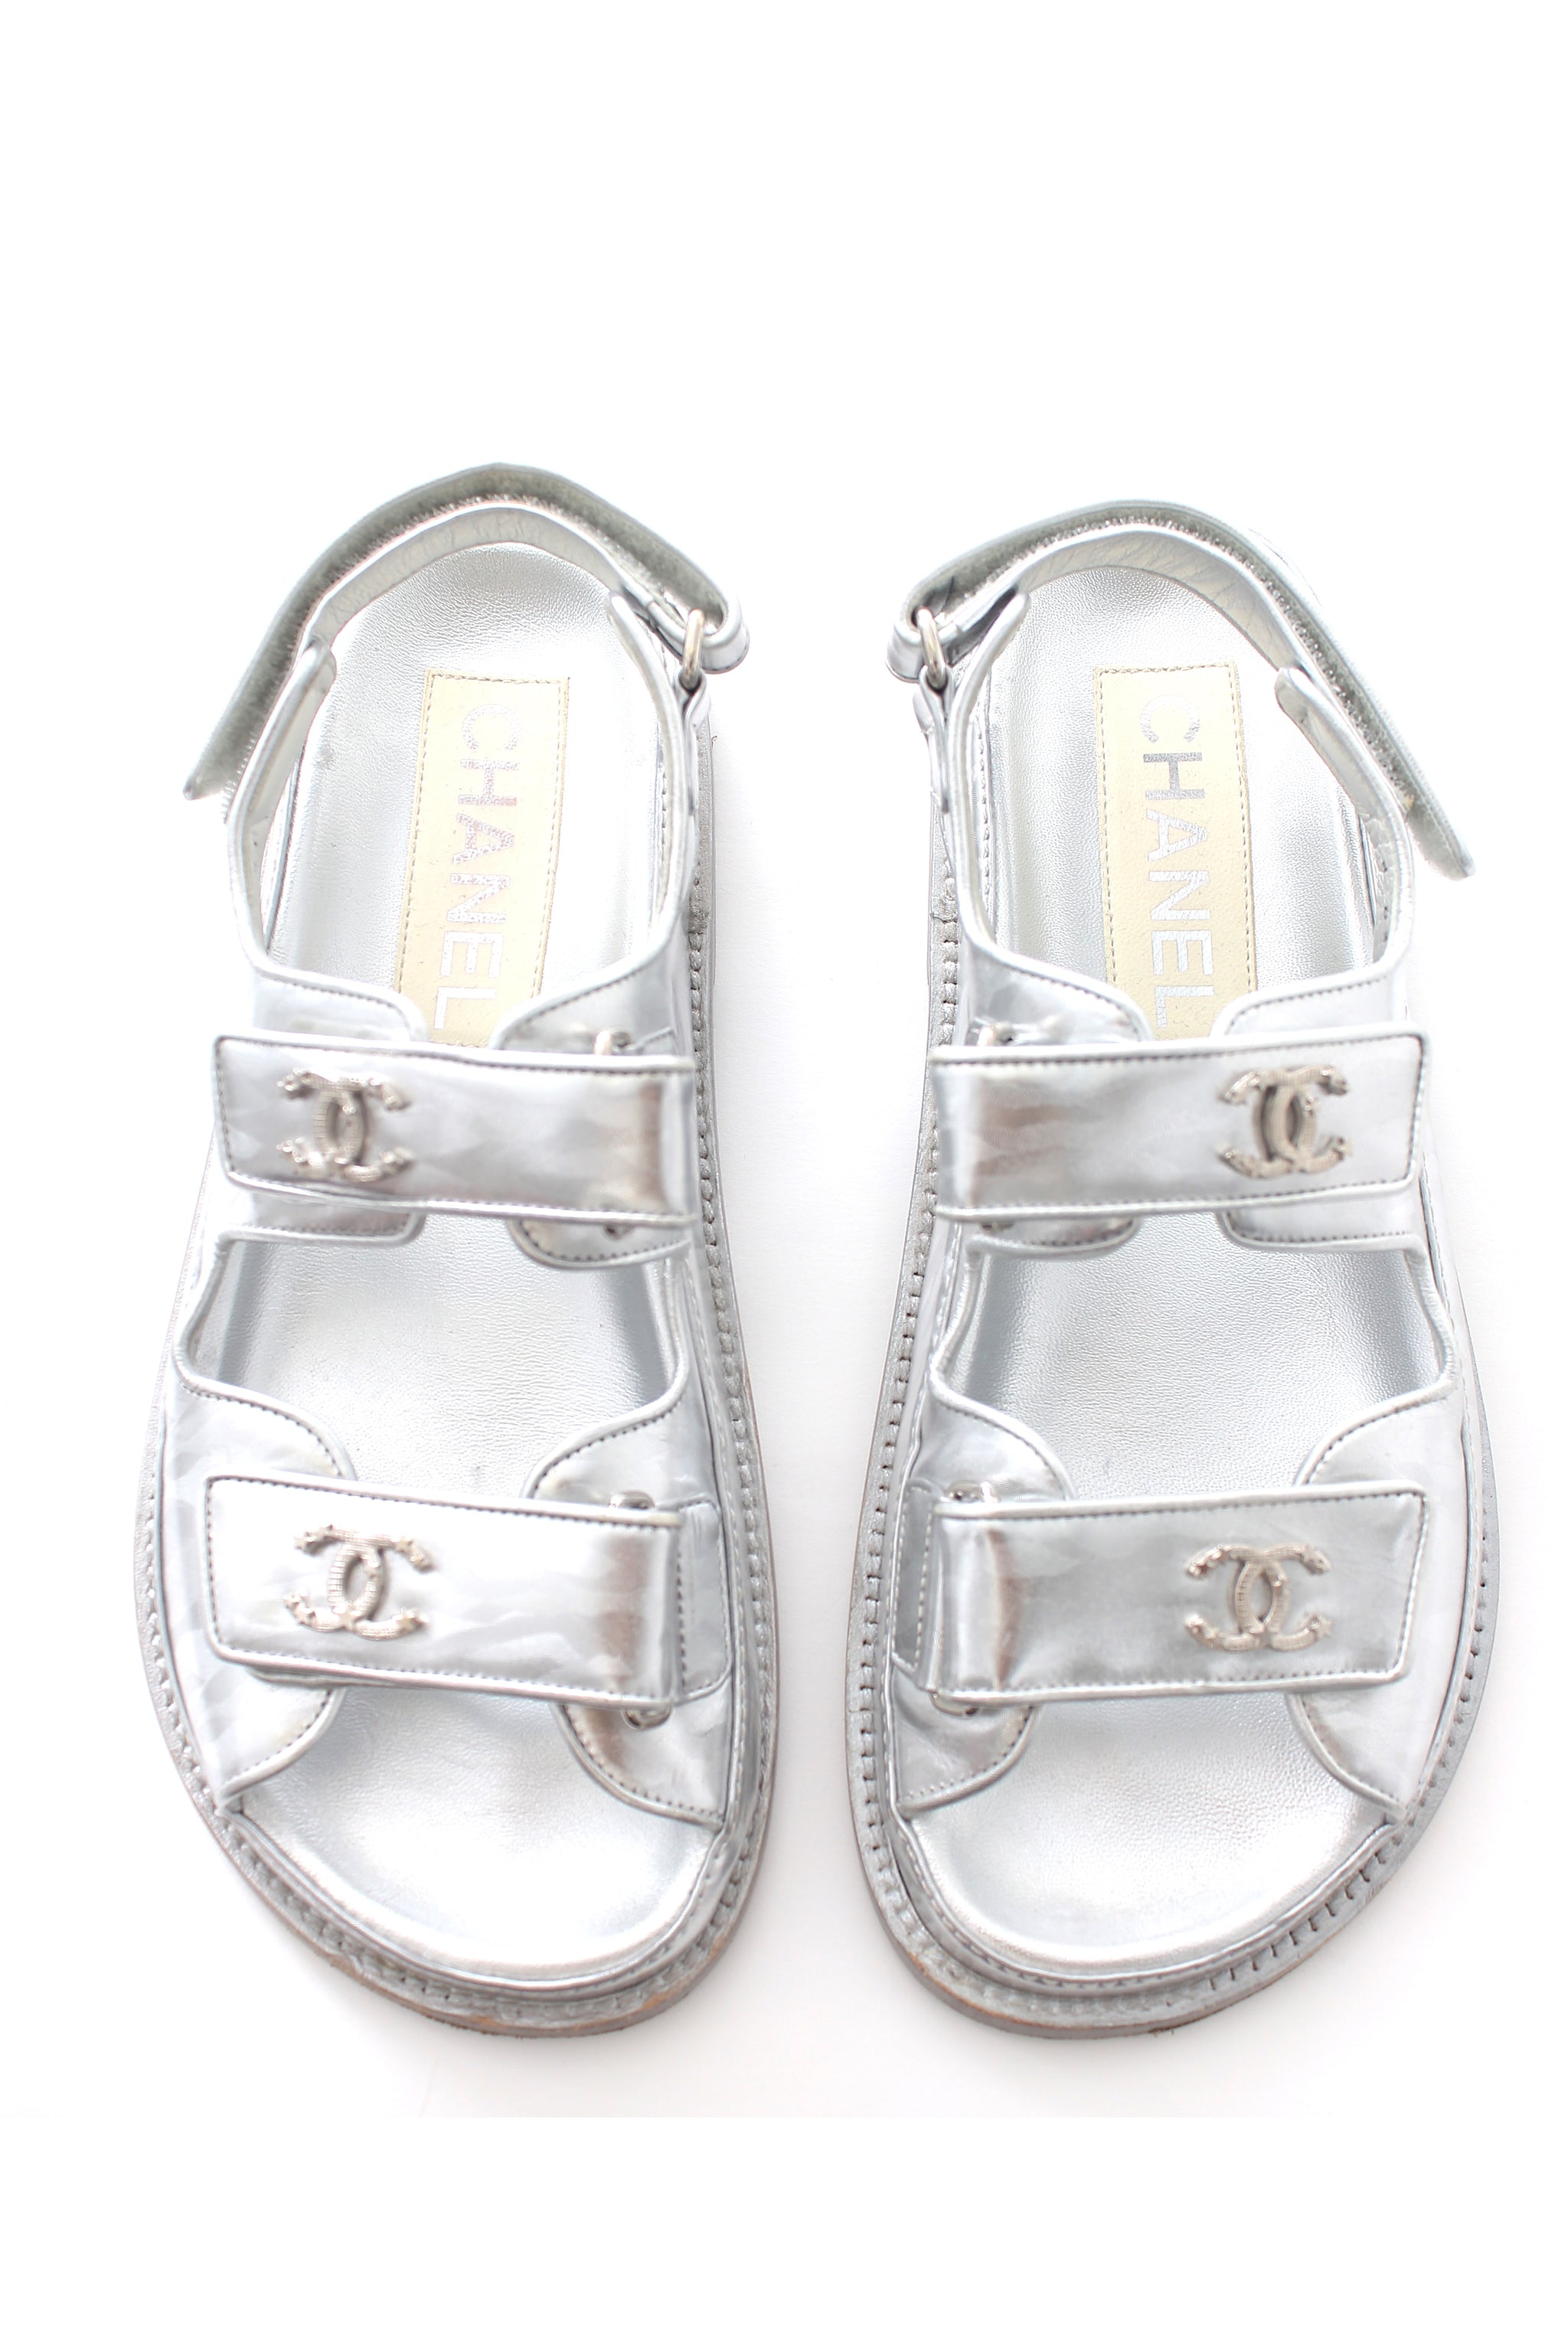 Chanel Dad Sandals in Laminated Calfskin with Star CC Logo - Special E -  Closet Upgrade